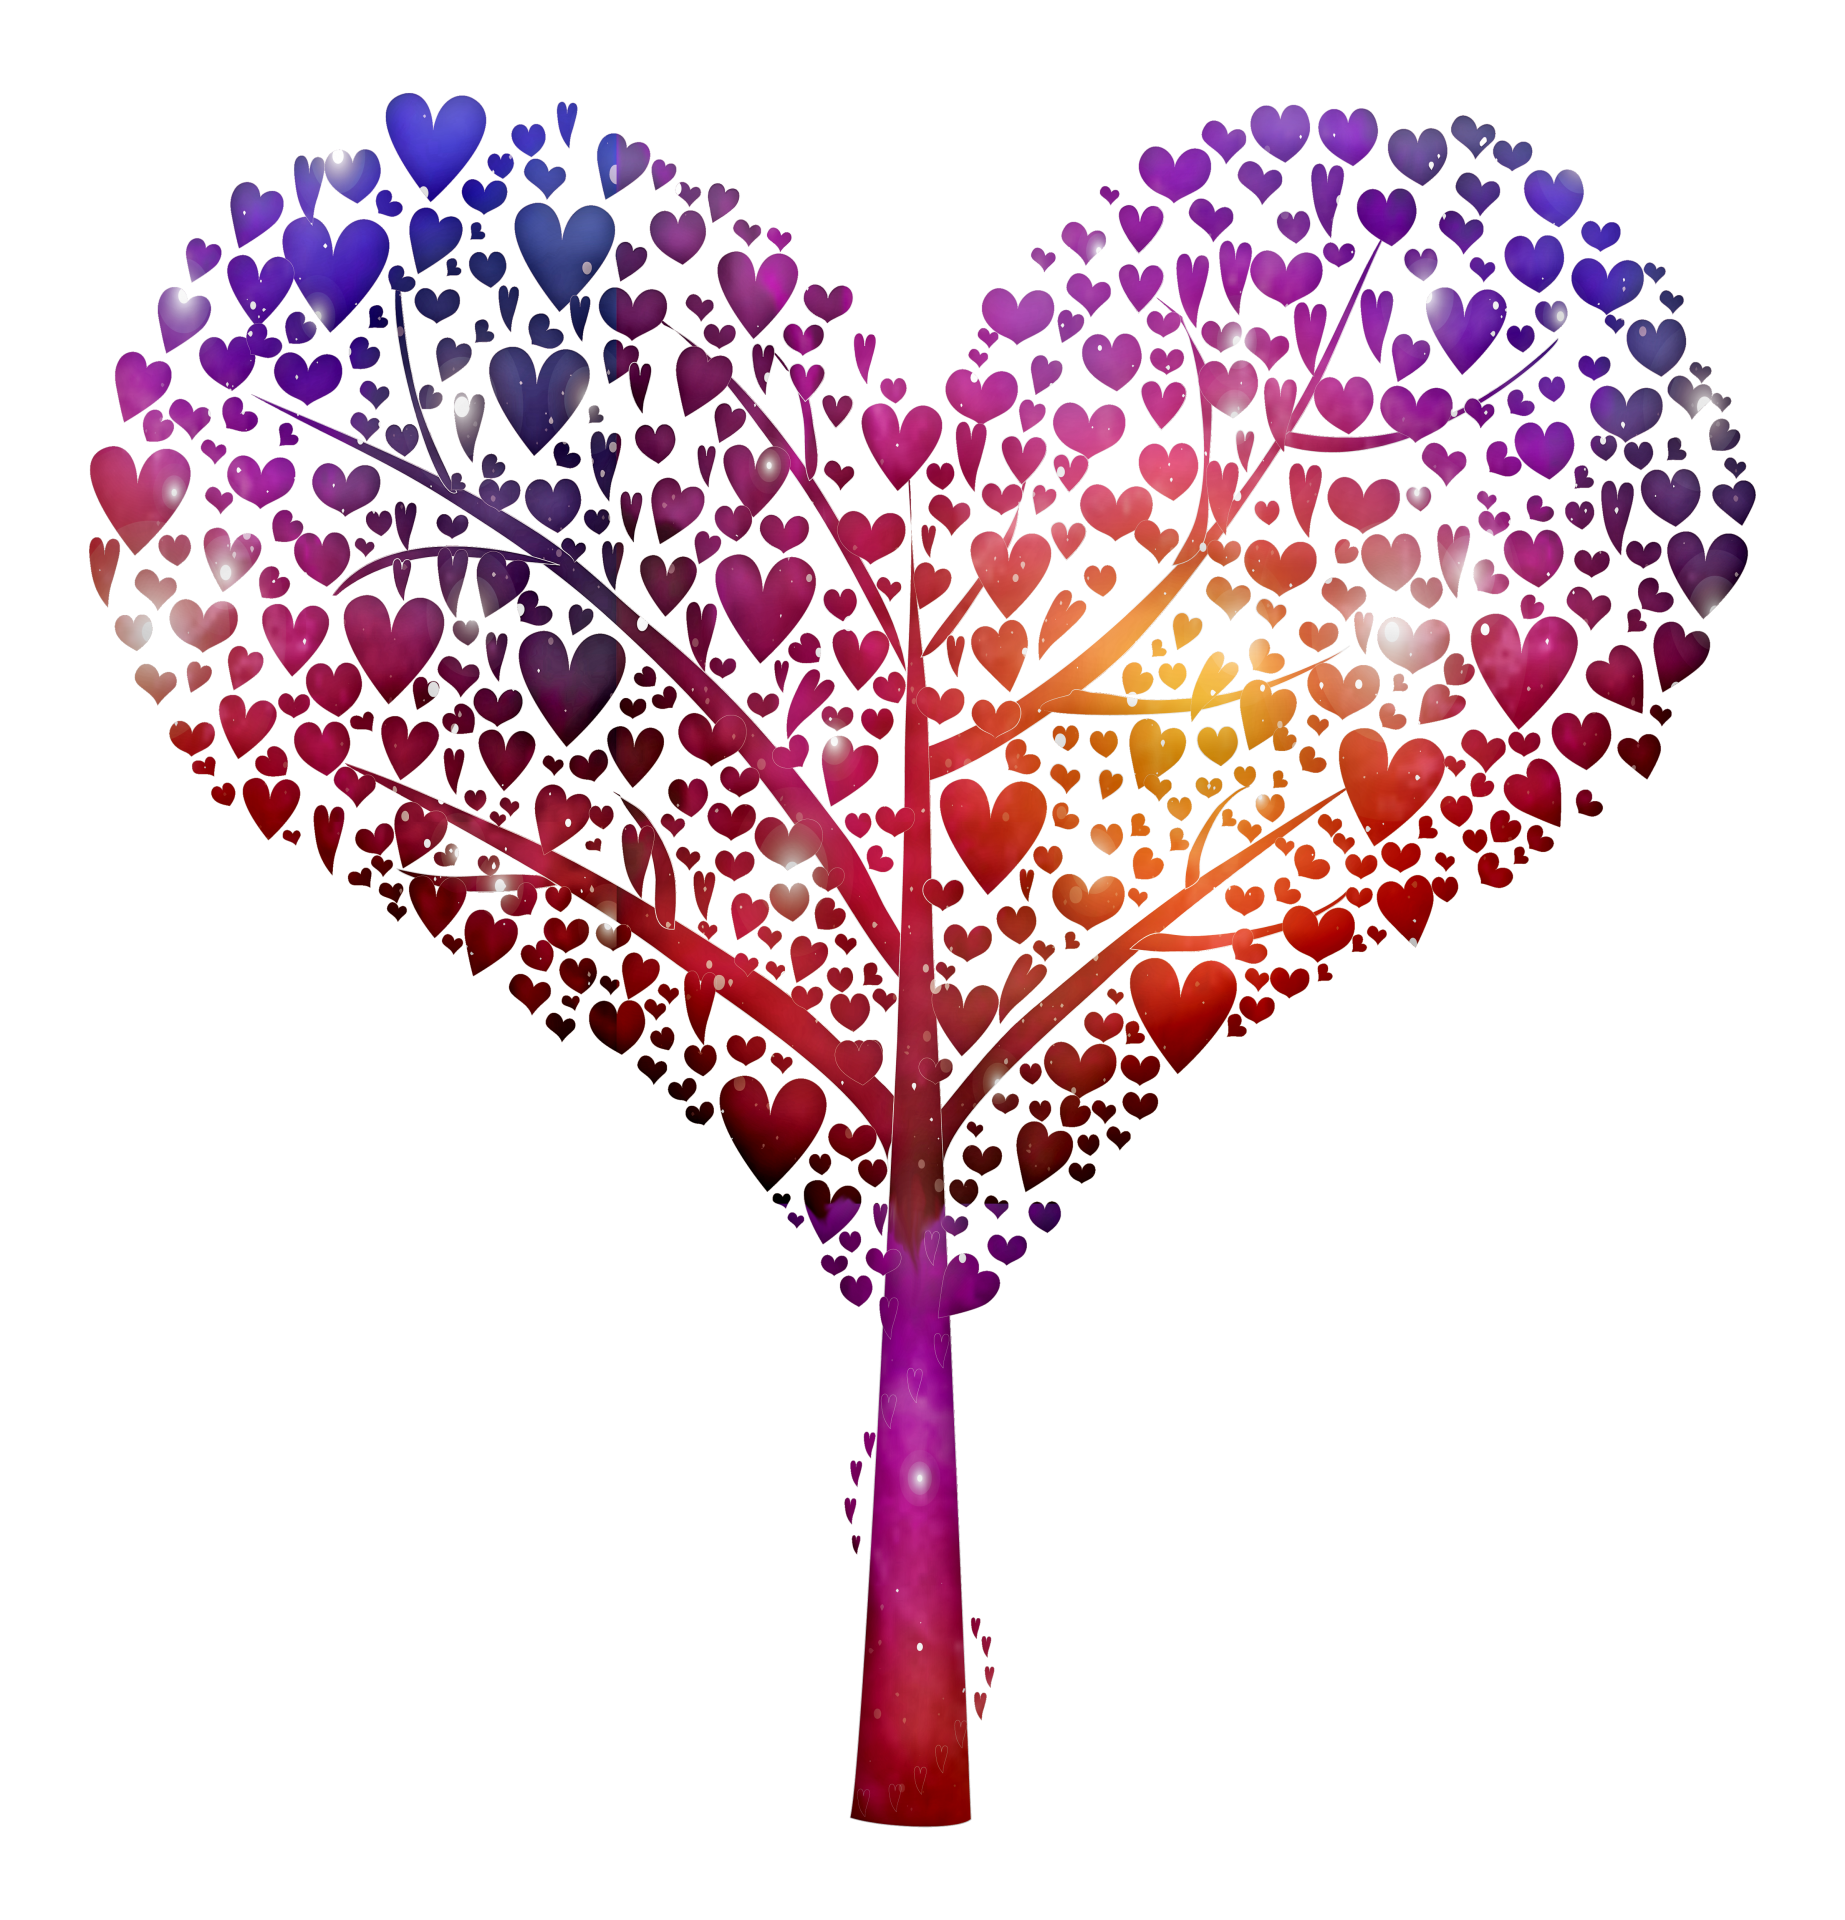 A Heart Shaped tree with a Galaxy pattern, very colorful